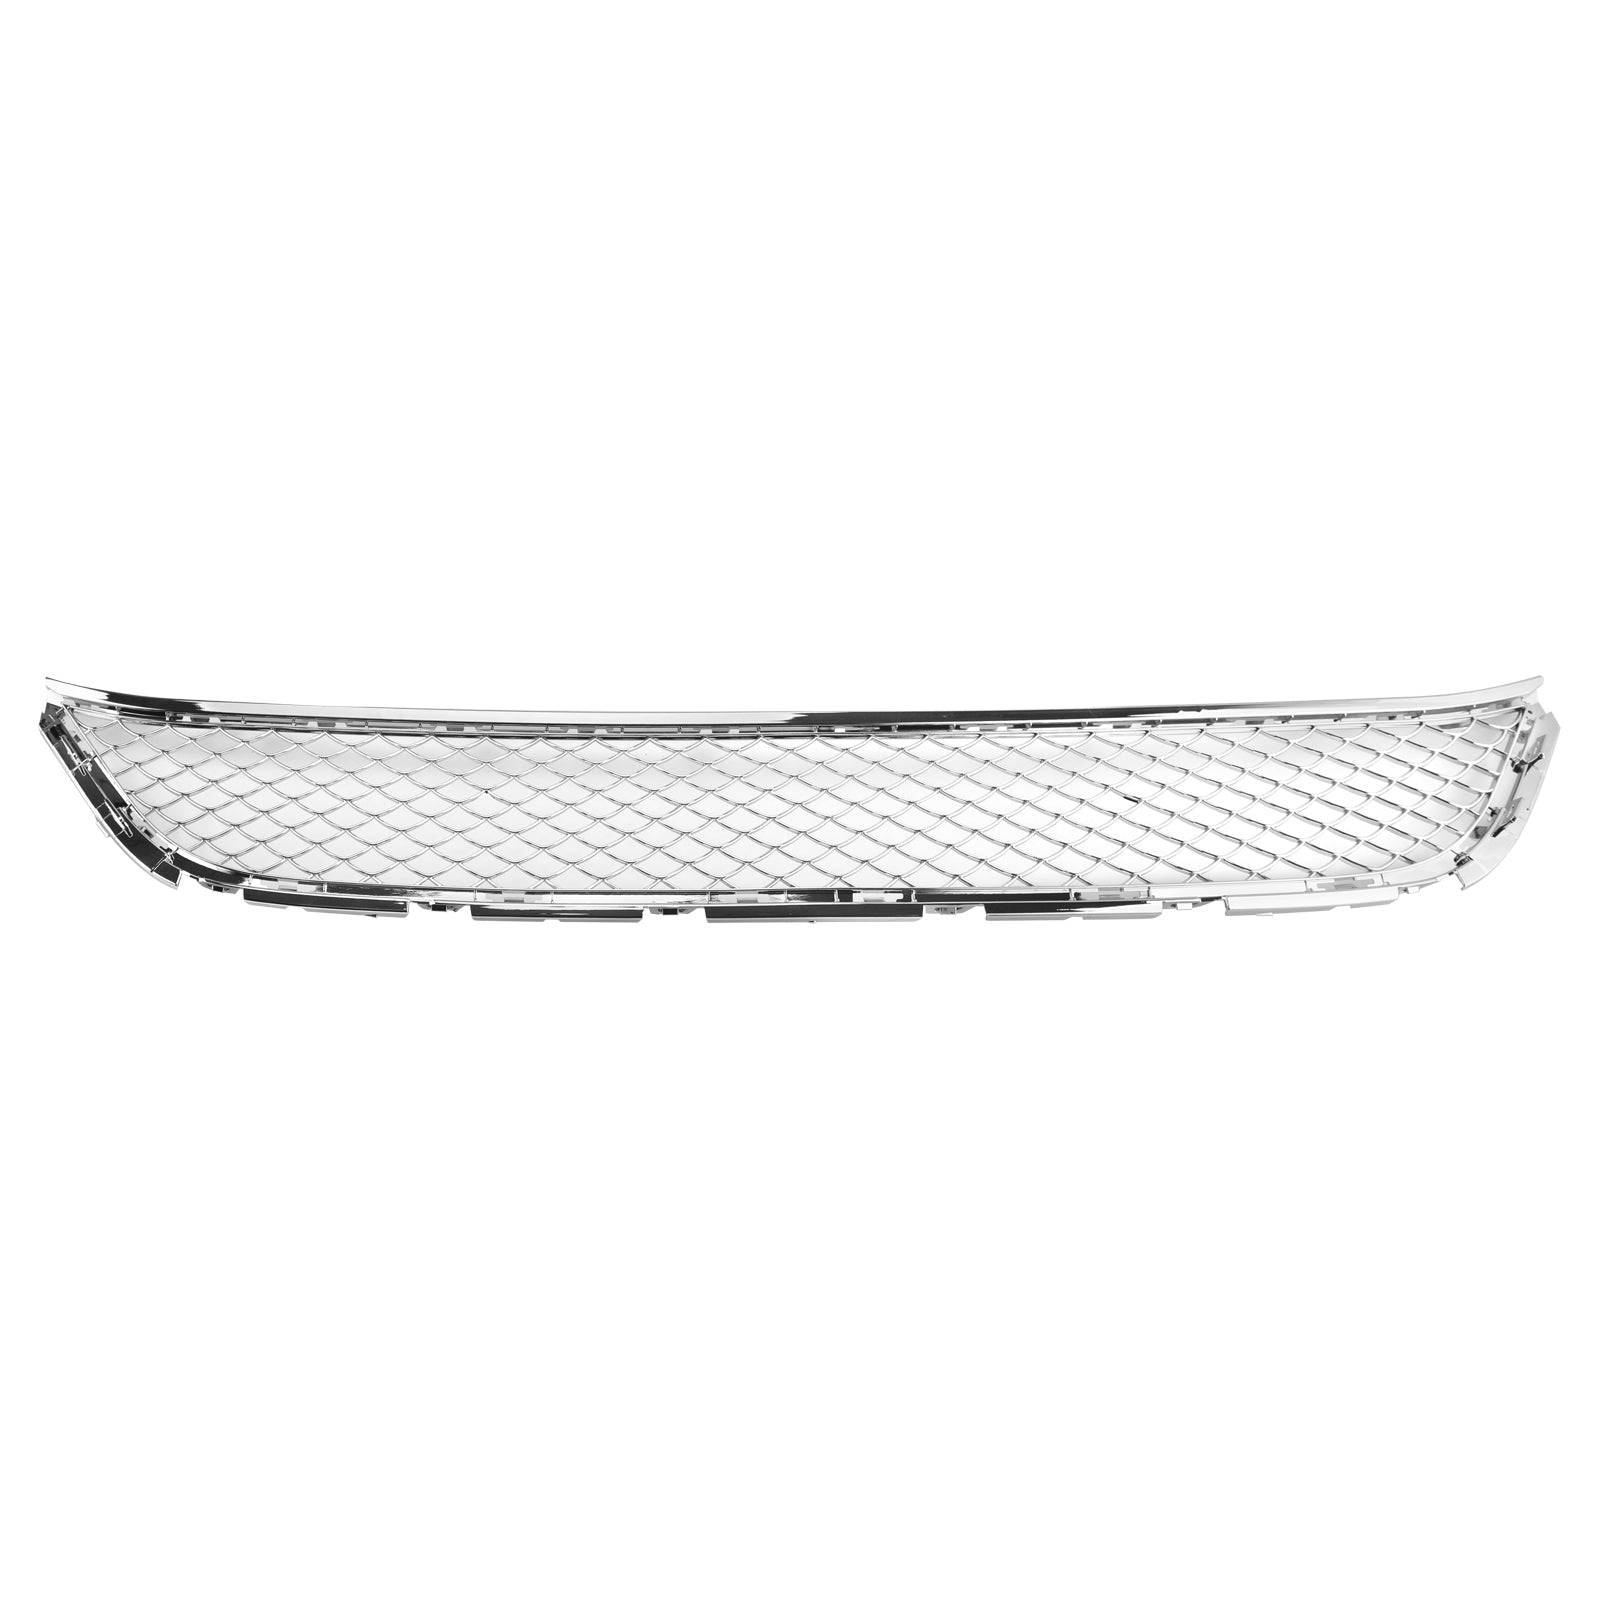 Mercedes Benz 2018-2021 W222 S-Class Facelift S65 AMG Style A2229068802 Body Kit Front Rear Bumper